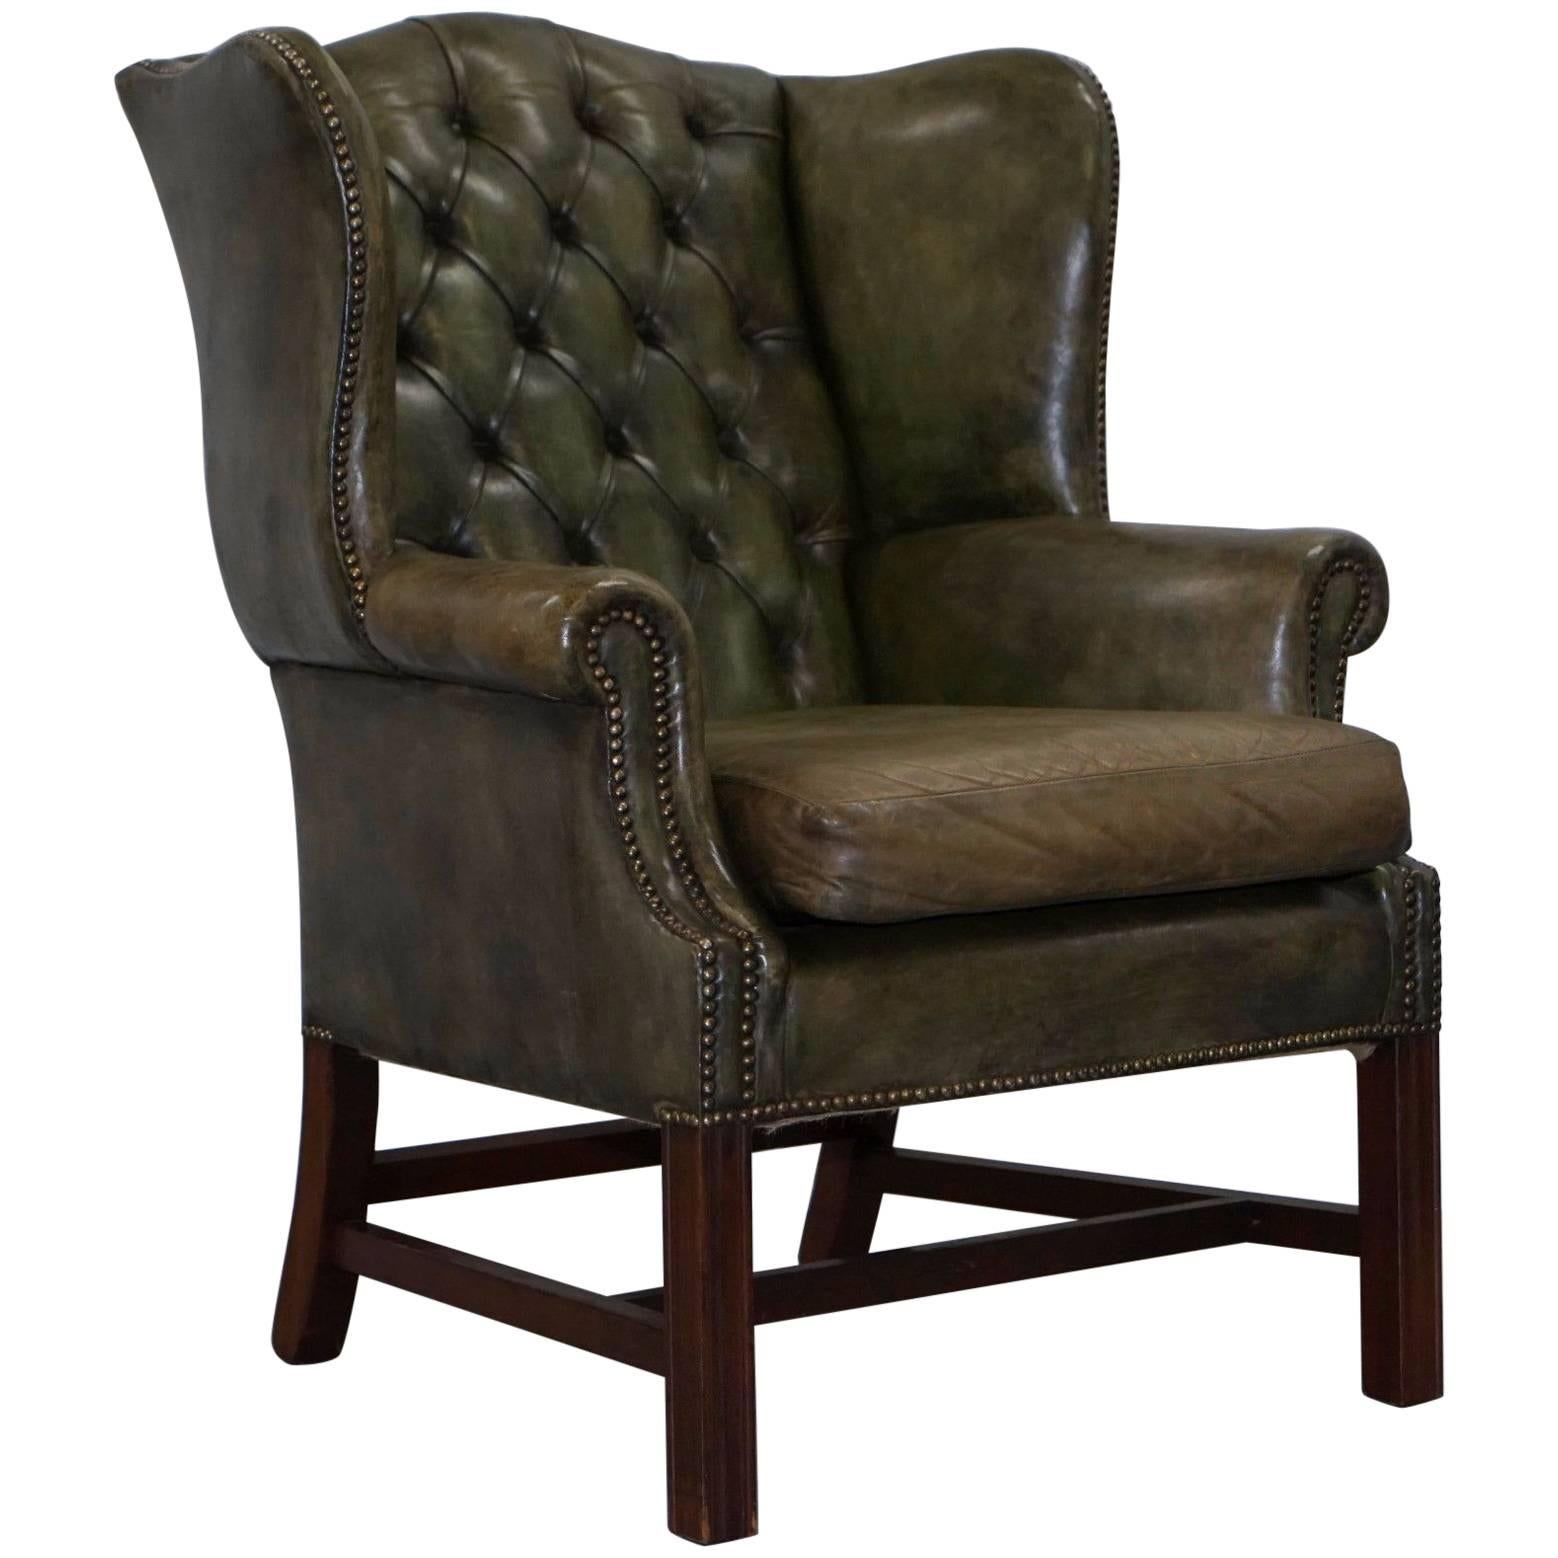 Original Hand Dyed 1960s Green Leather Chesterfield Georgian Wingback Armchair